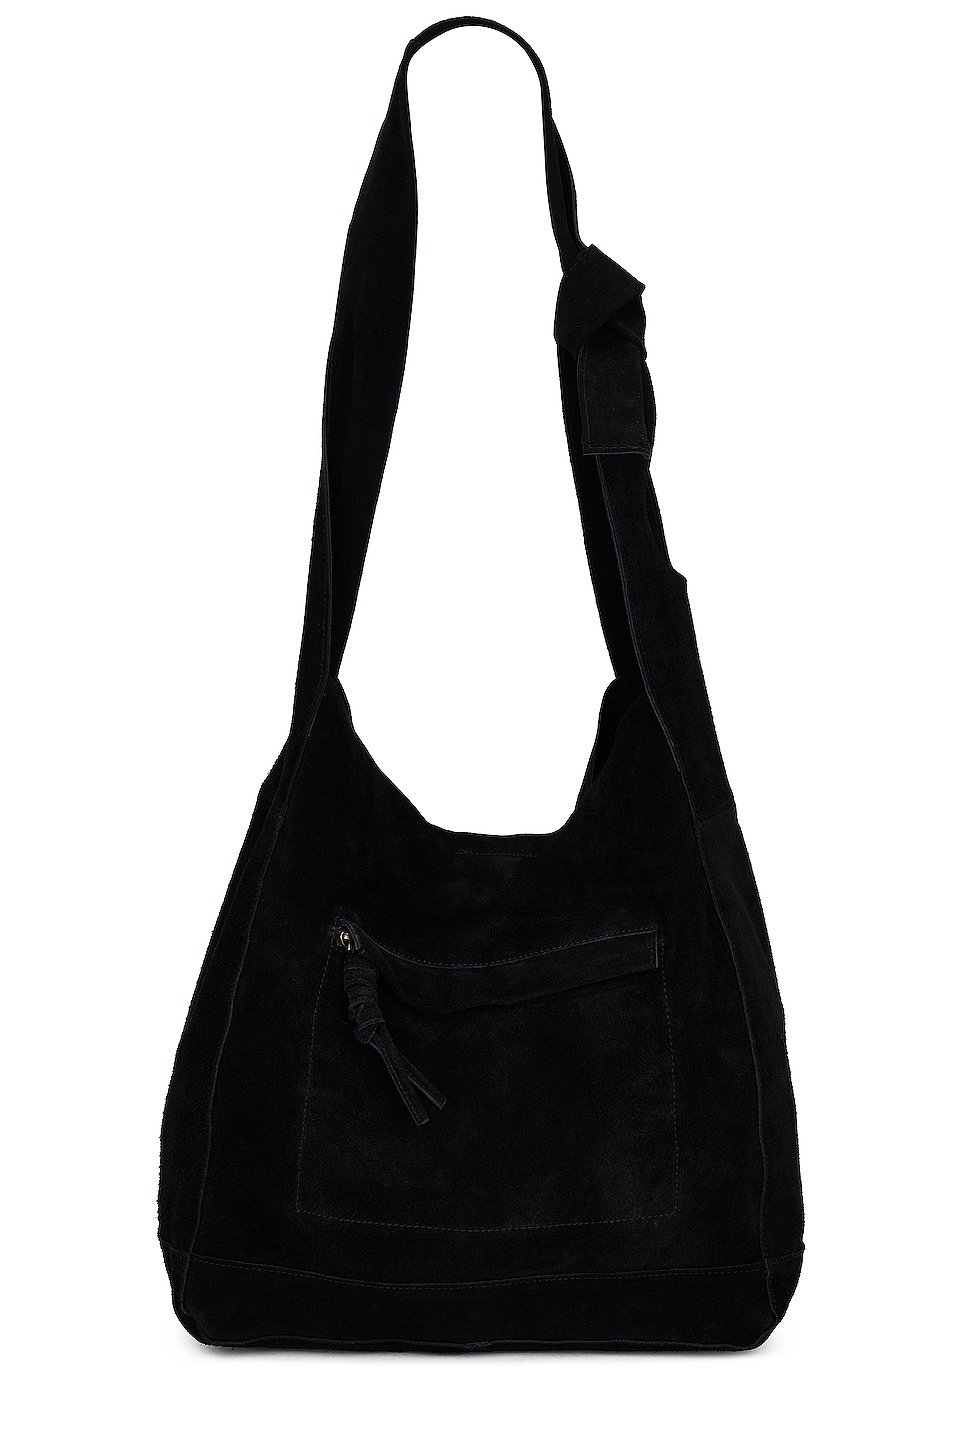 Free People Jessa Suede Carryall